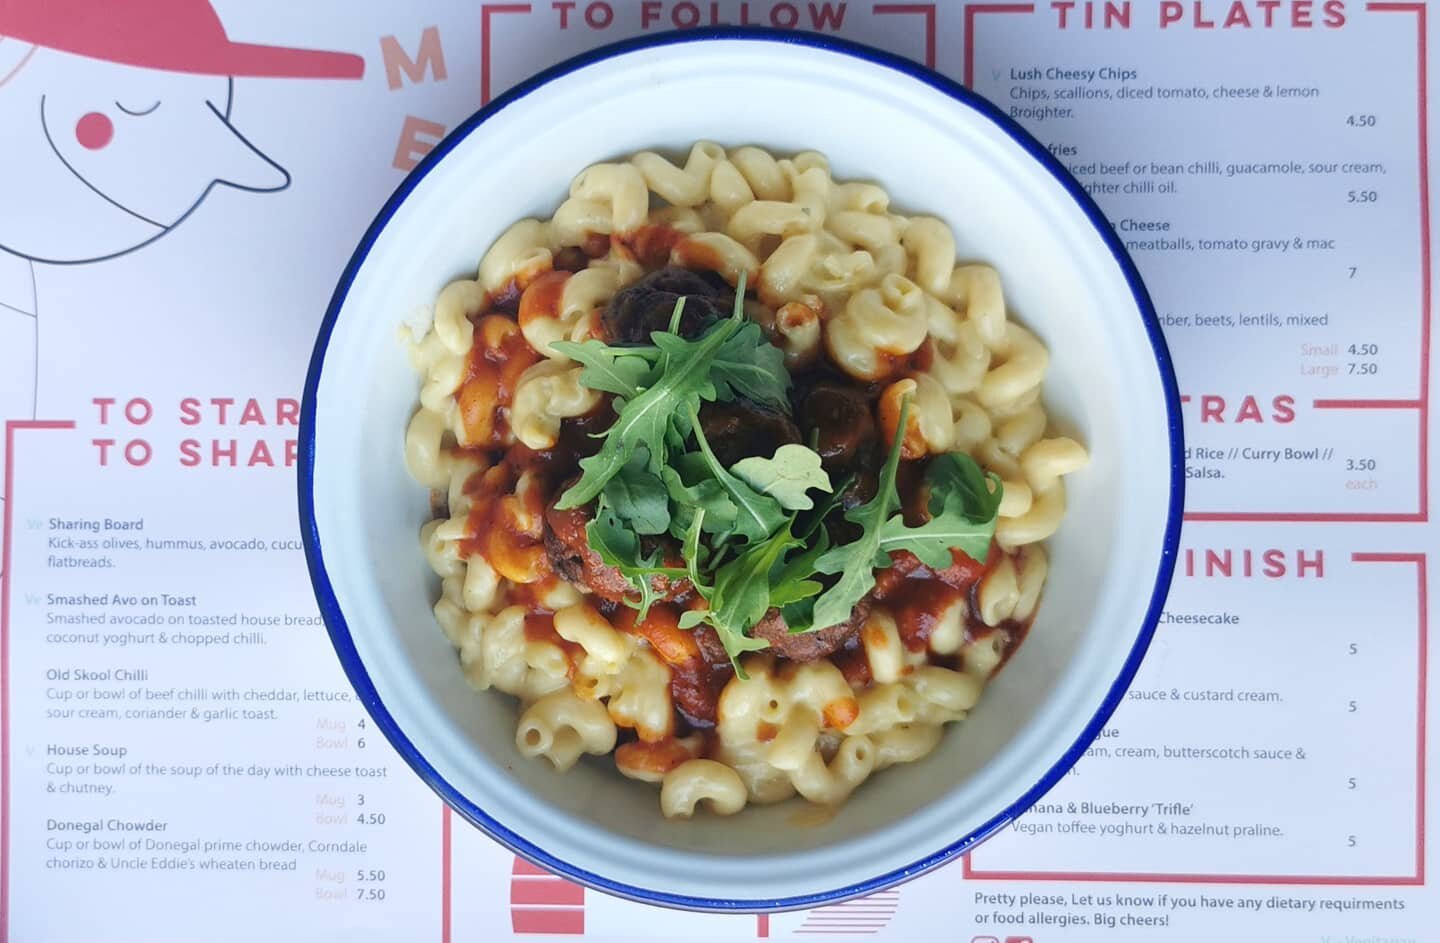 Our Mac 'n' Cheese is exactly what you need today 😻 with Doherty's famous meatballs and tomato gravy. 
👀You won't be disappointed!👀

#macncheese #dohertys #dohertysmeats #cheese #sundaypints #sundaycure #tinplates #derry #menu #derryfood #derryfoo